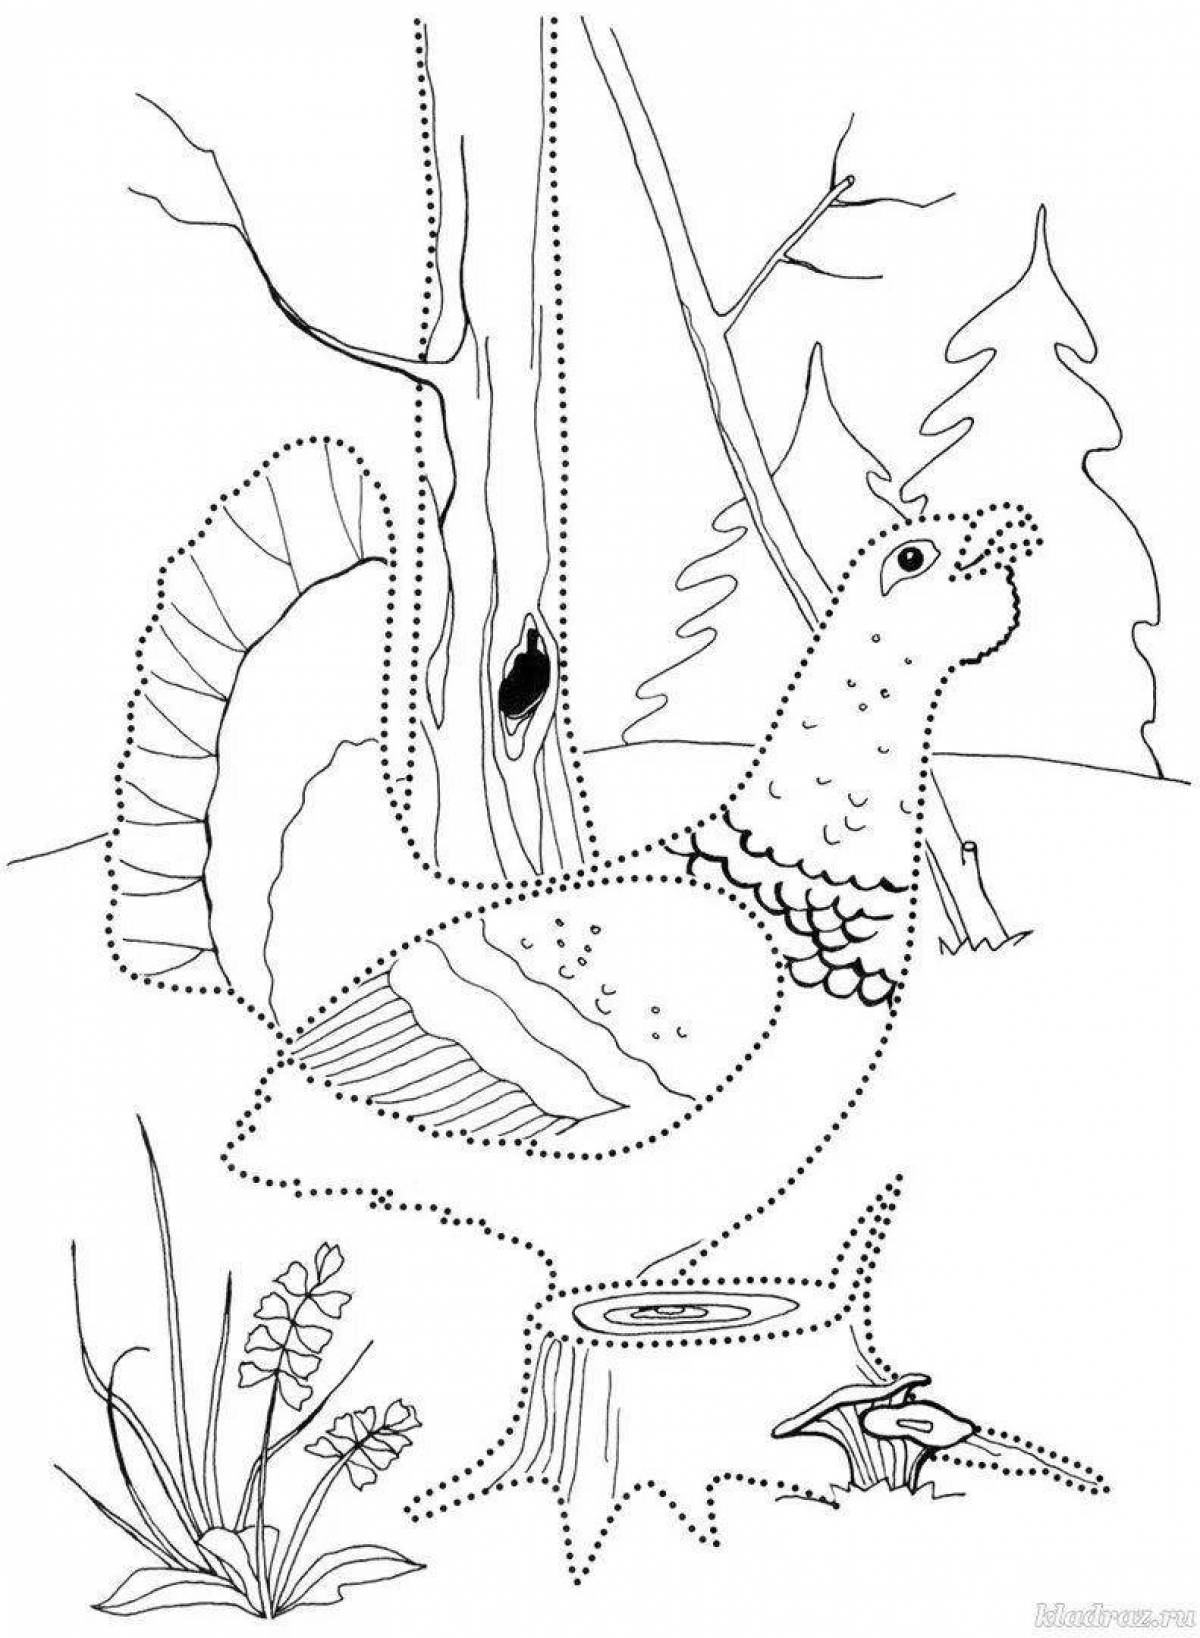 Vibrant grouse coloring page for kids